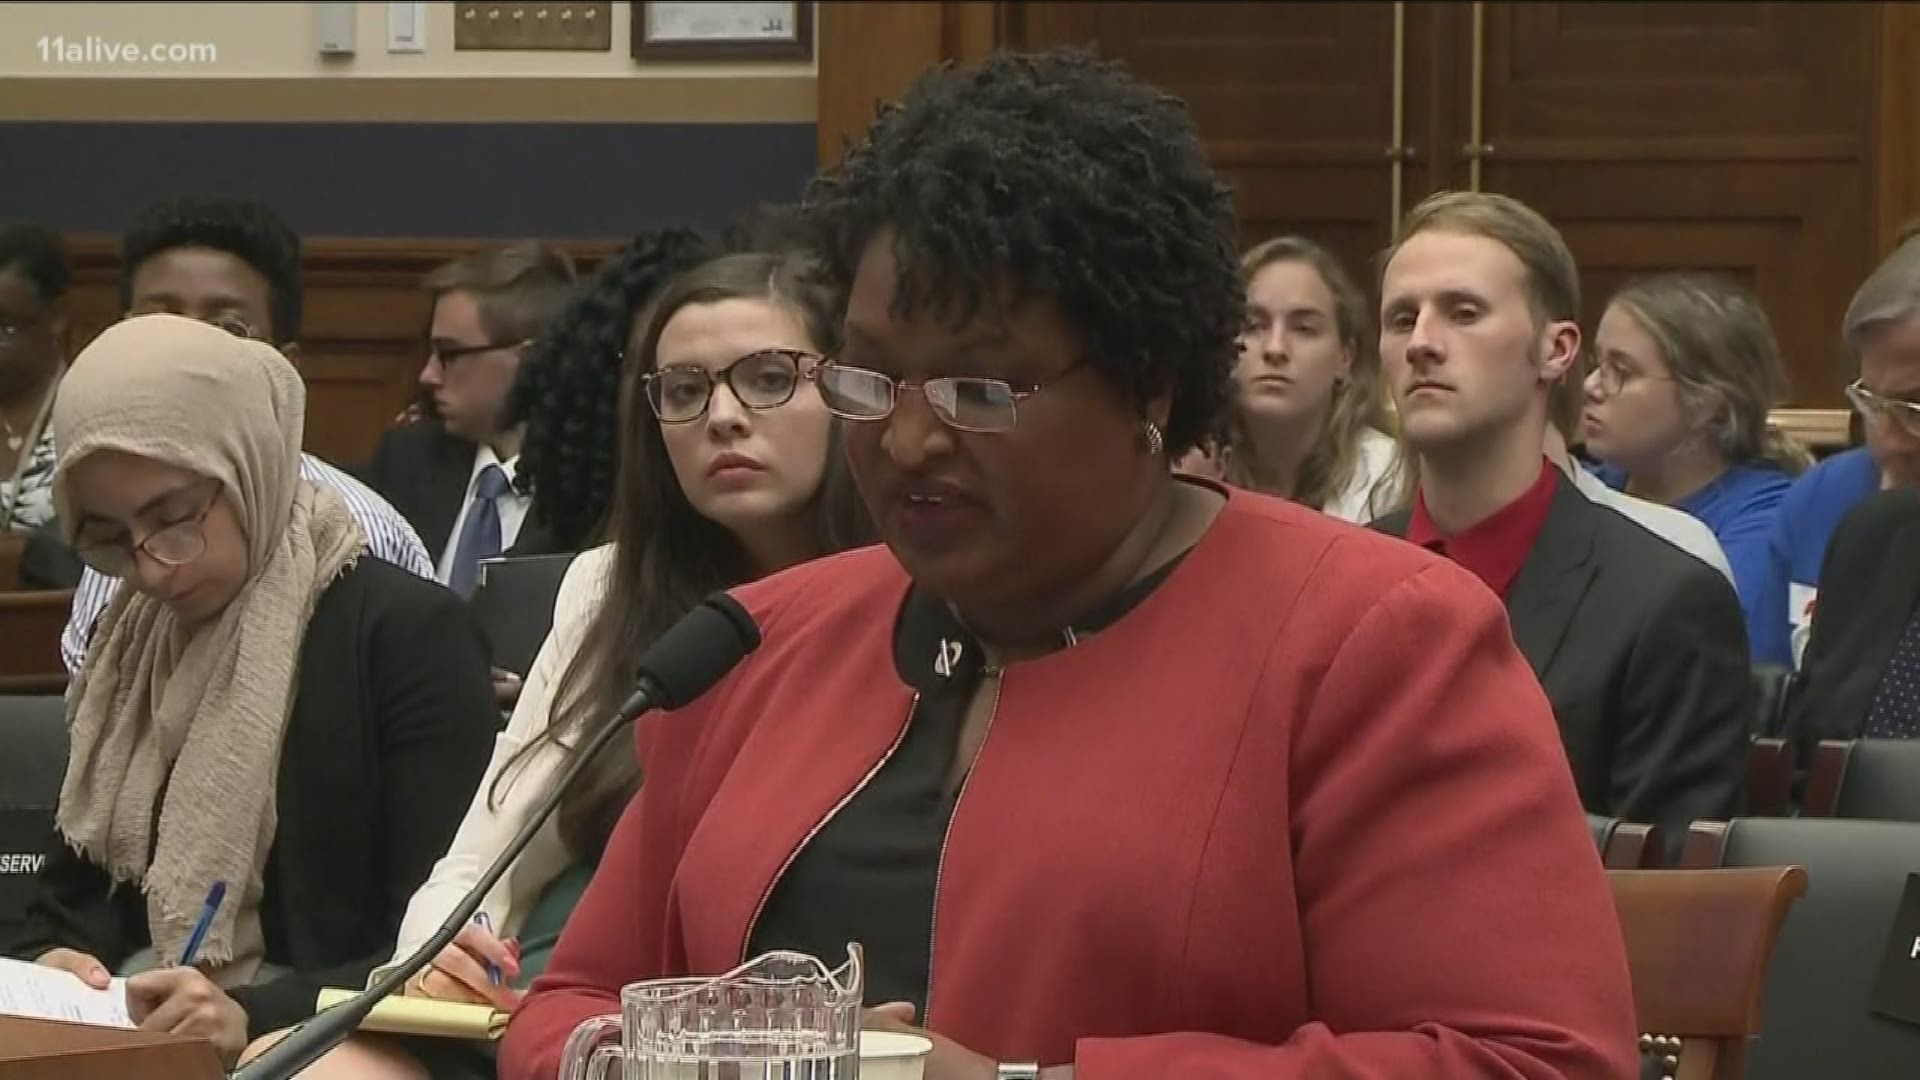 She spoke to a House panel in Washington about changes to the Voting Rights Act brought by a Supreme Court decision.